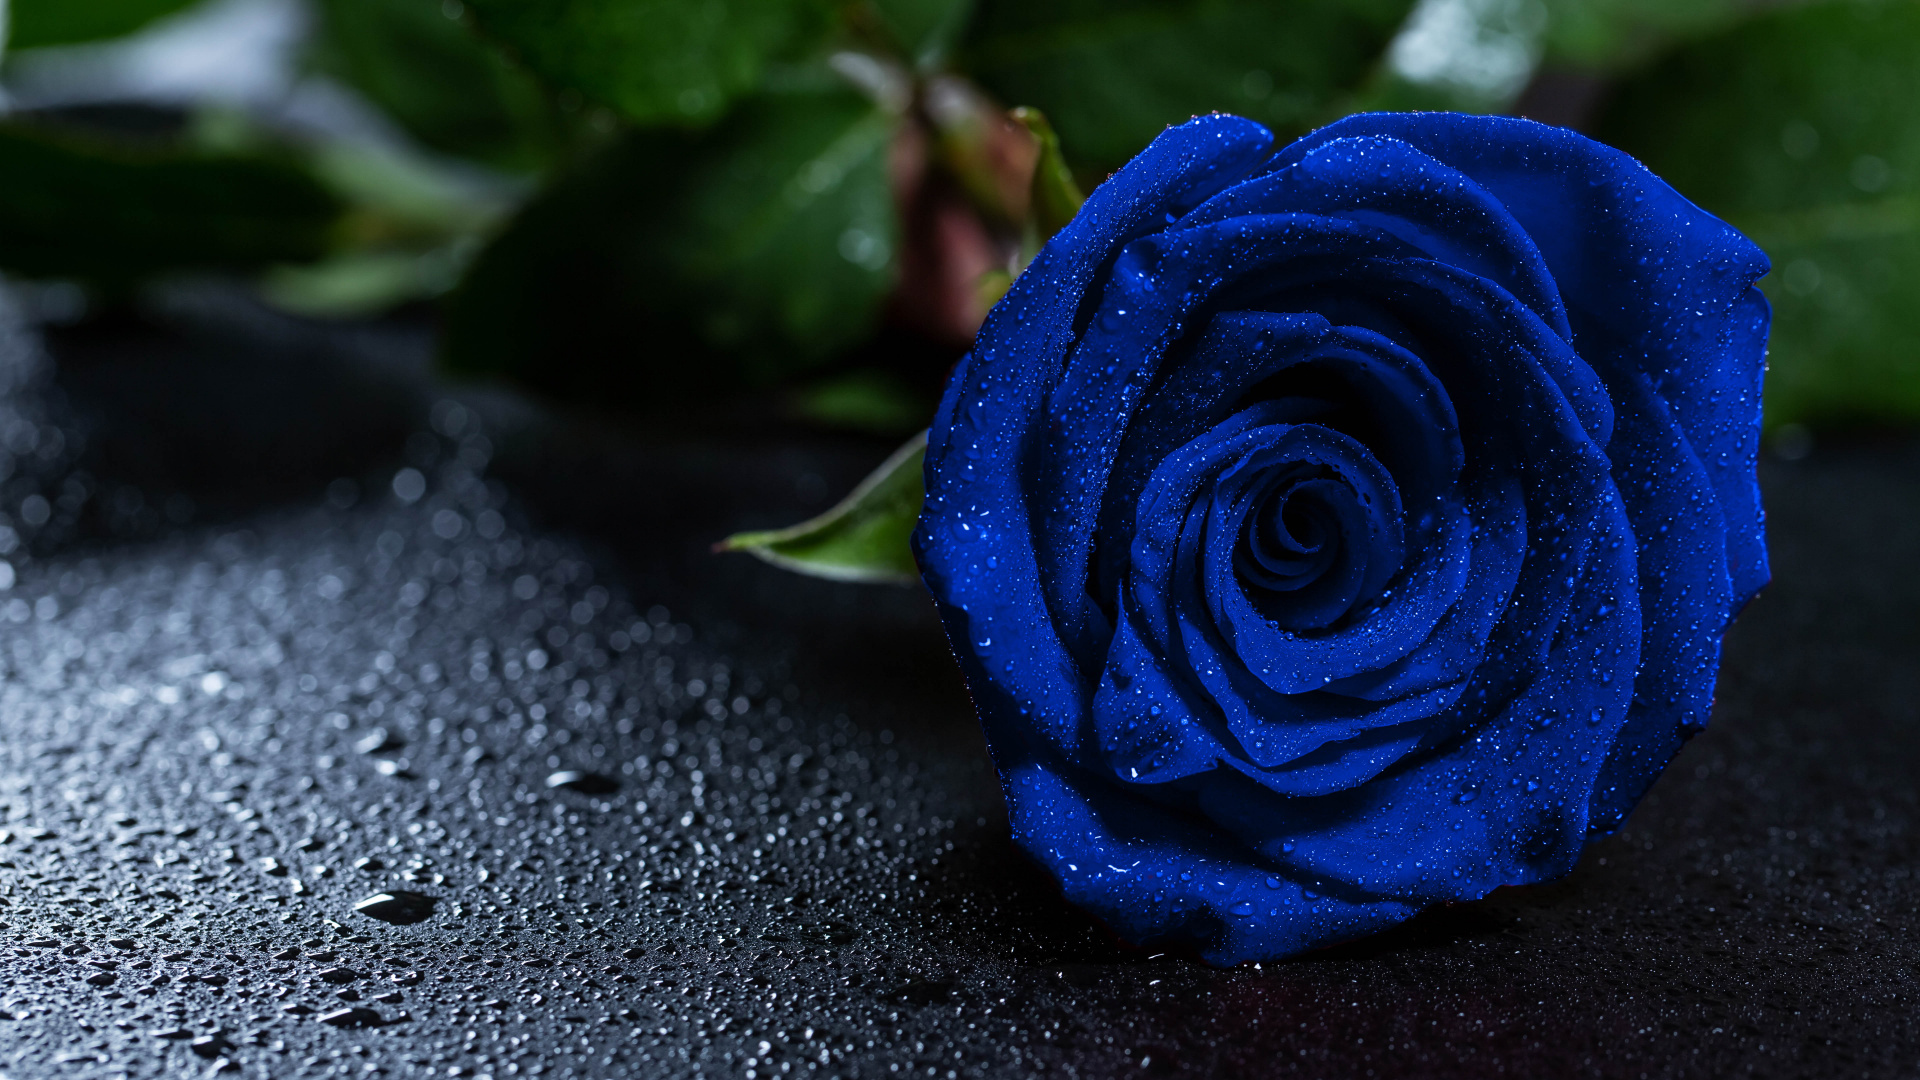 Blue Rose on Black Surface. Wallpaper in 1920x1080 Resolution